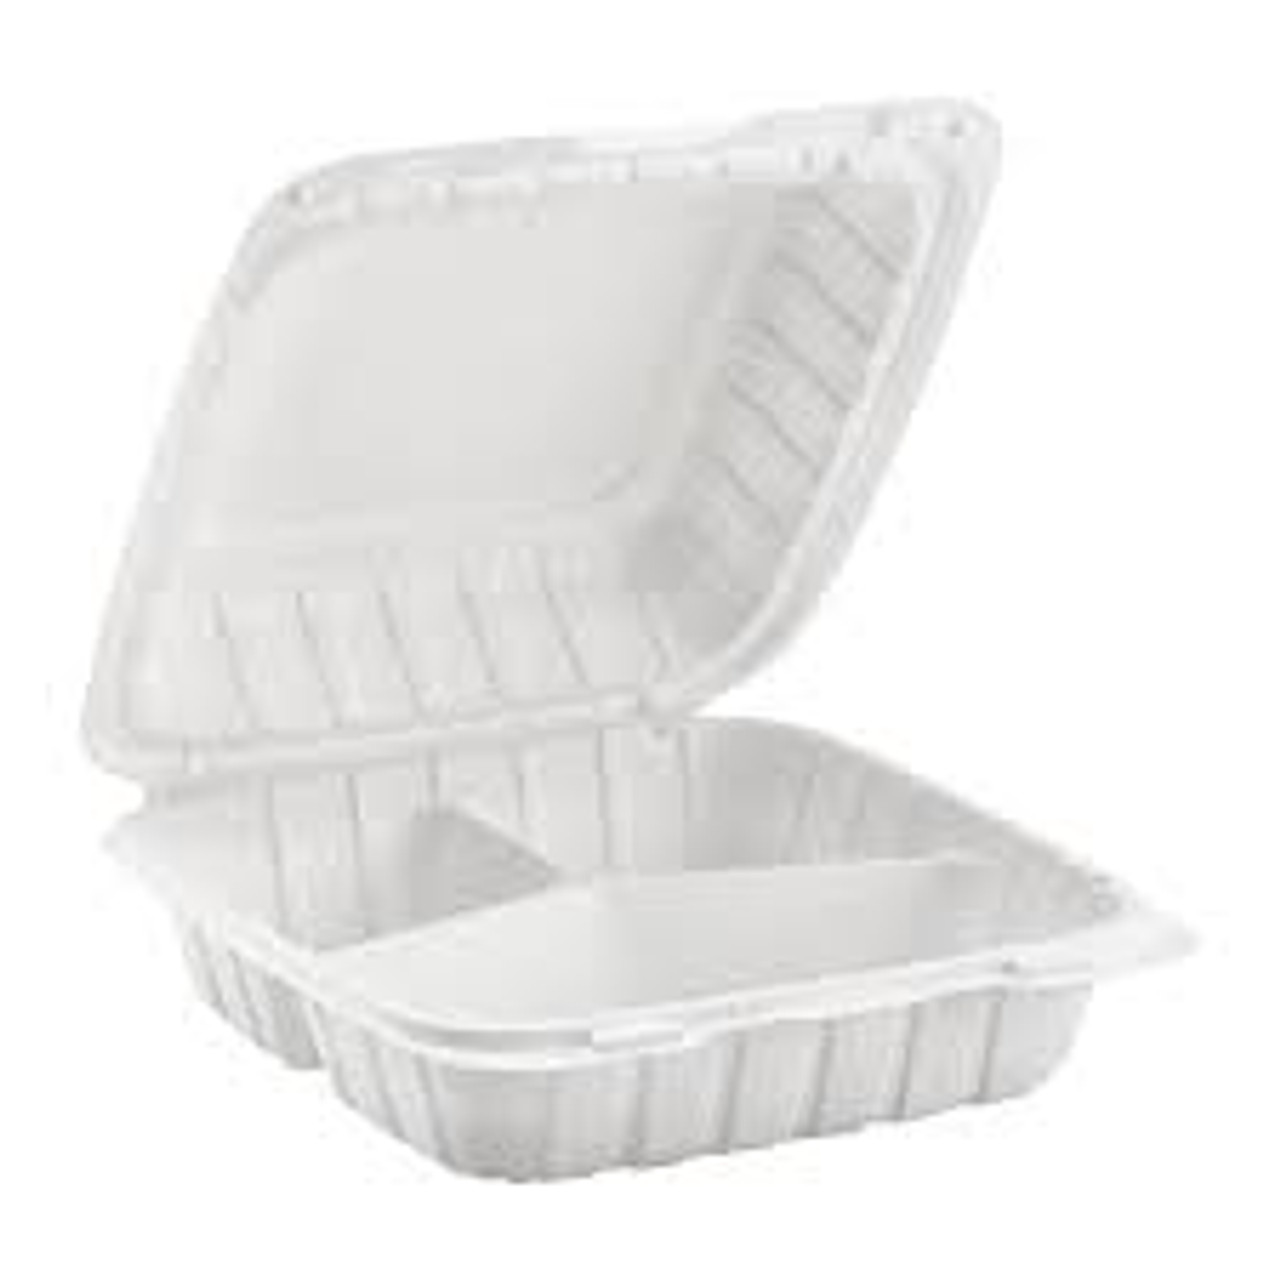 9 x 9 x 3 MFPP 3 Compartment Clear Hinged Take Out Container - Case of 150